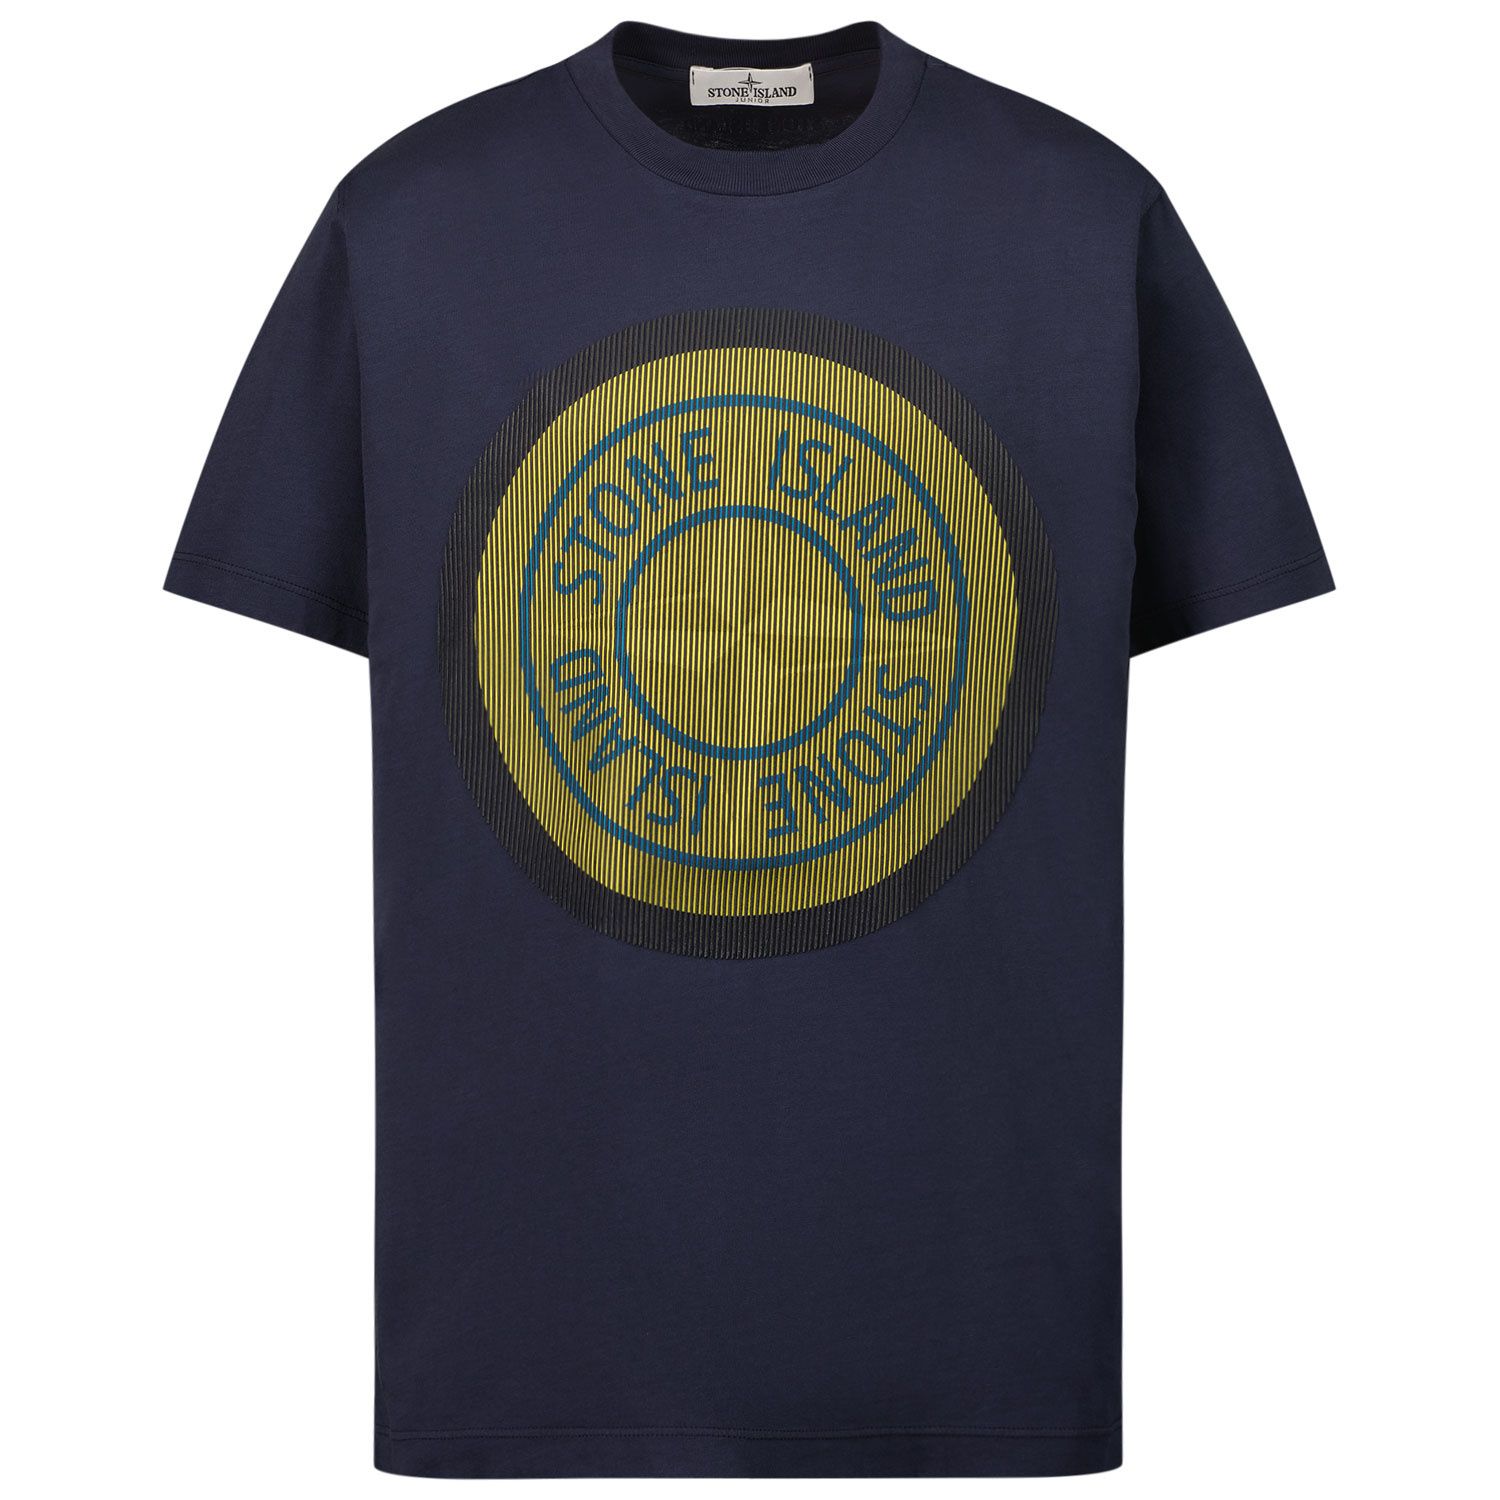 Picture of Stone Island 761621069 kids t-shirt navy